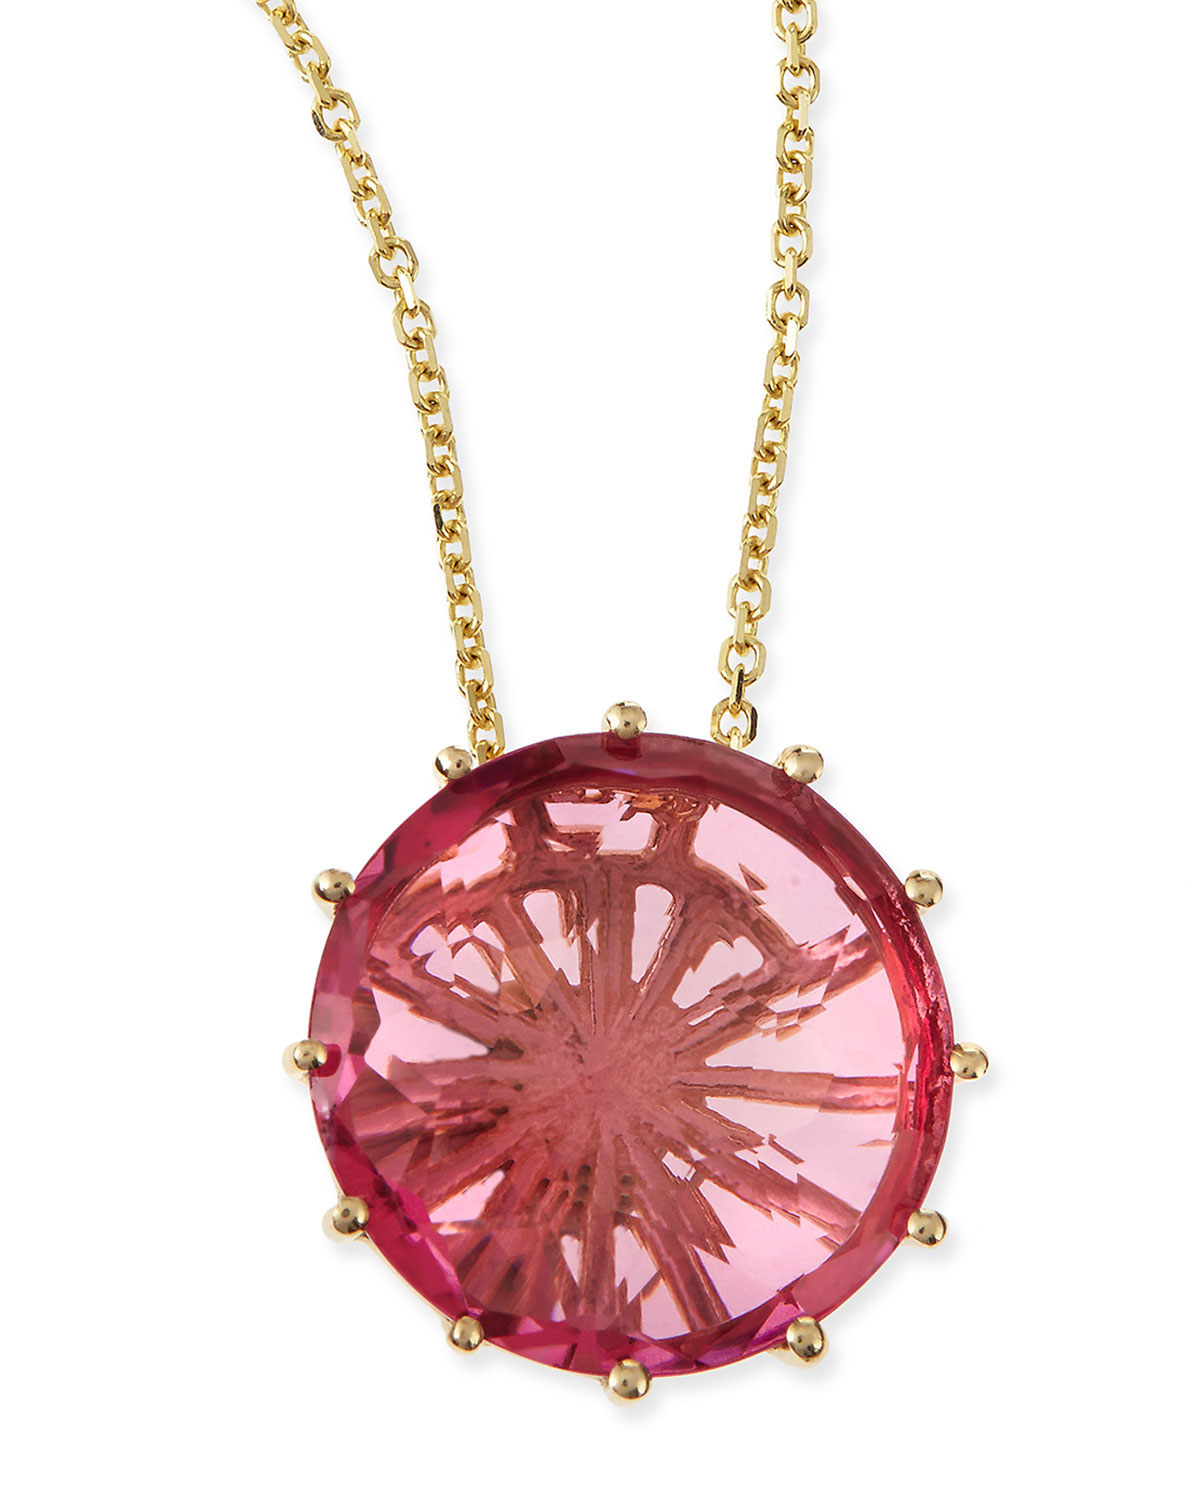 Kalan By Suzanne Kalan 12Mm Round Pink Topaz Pendant Necklace in Red ...